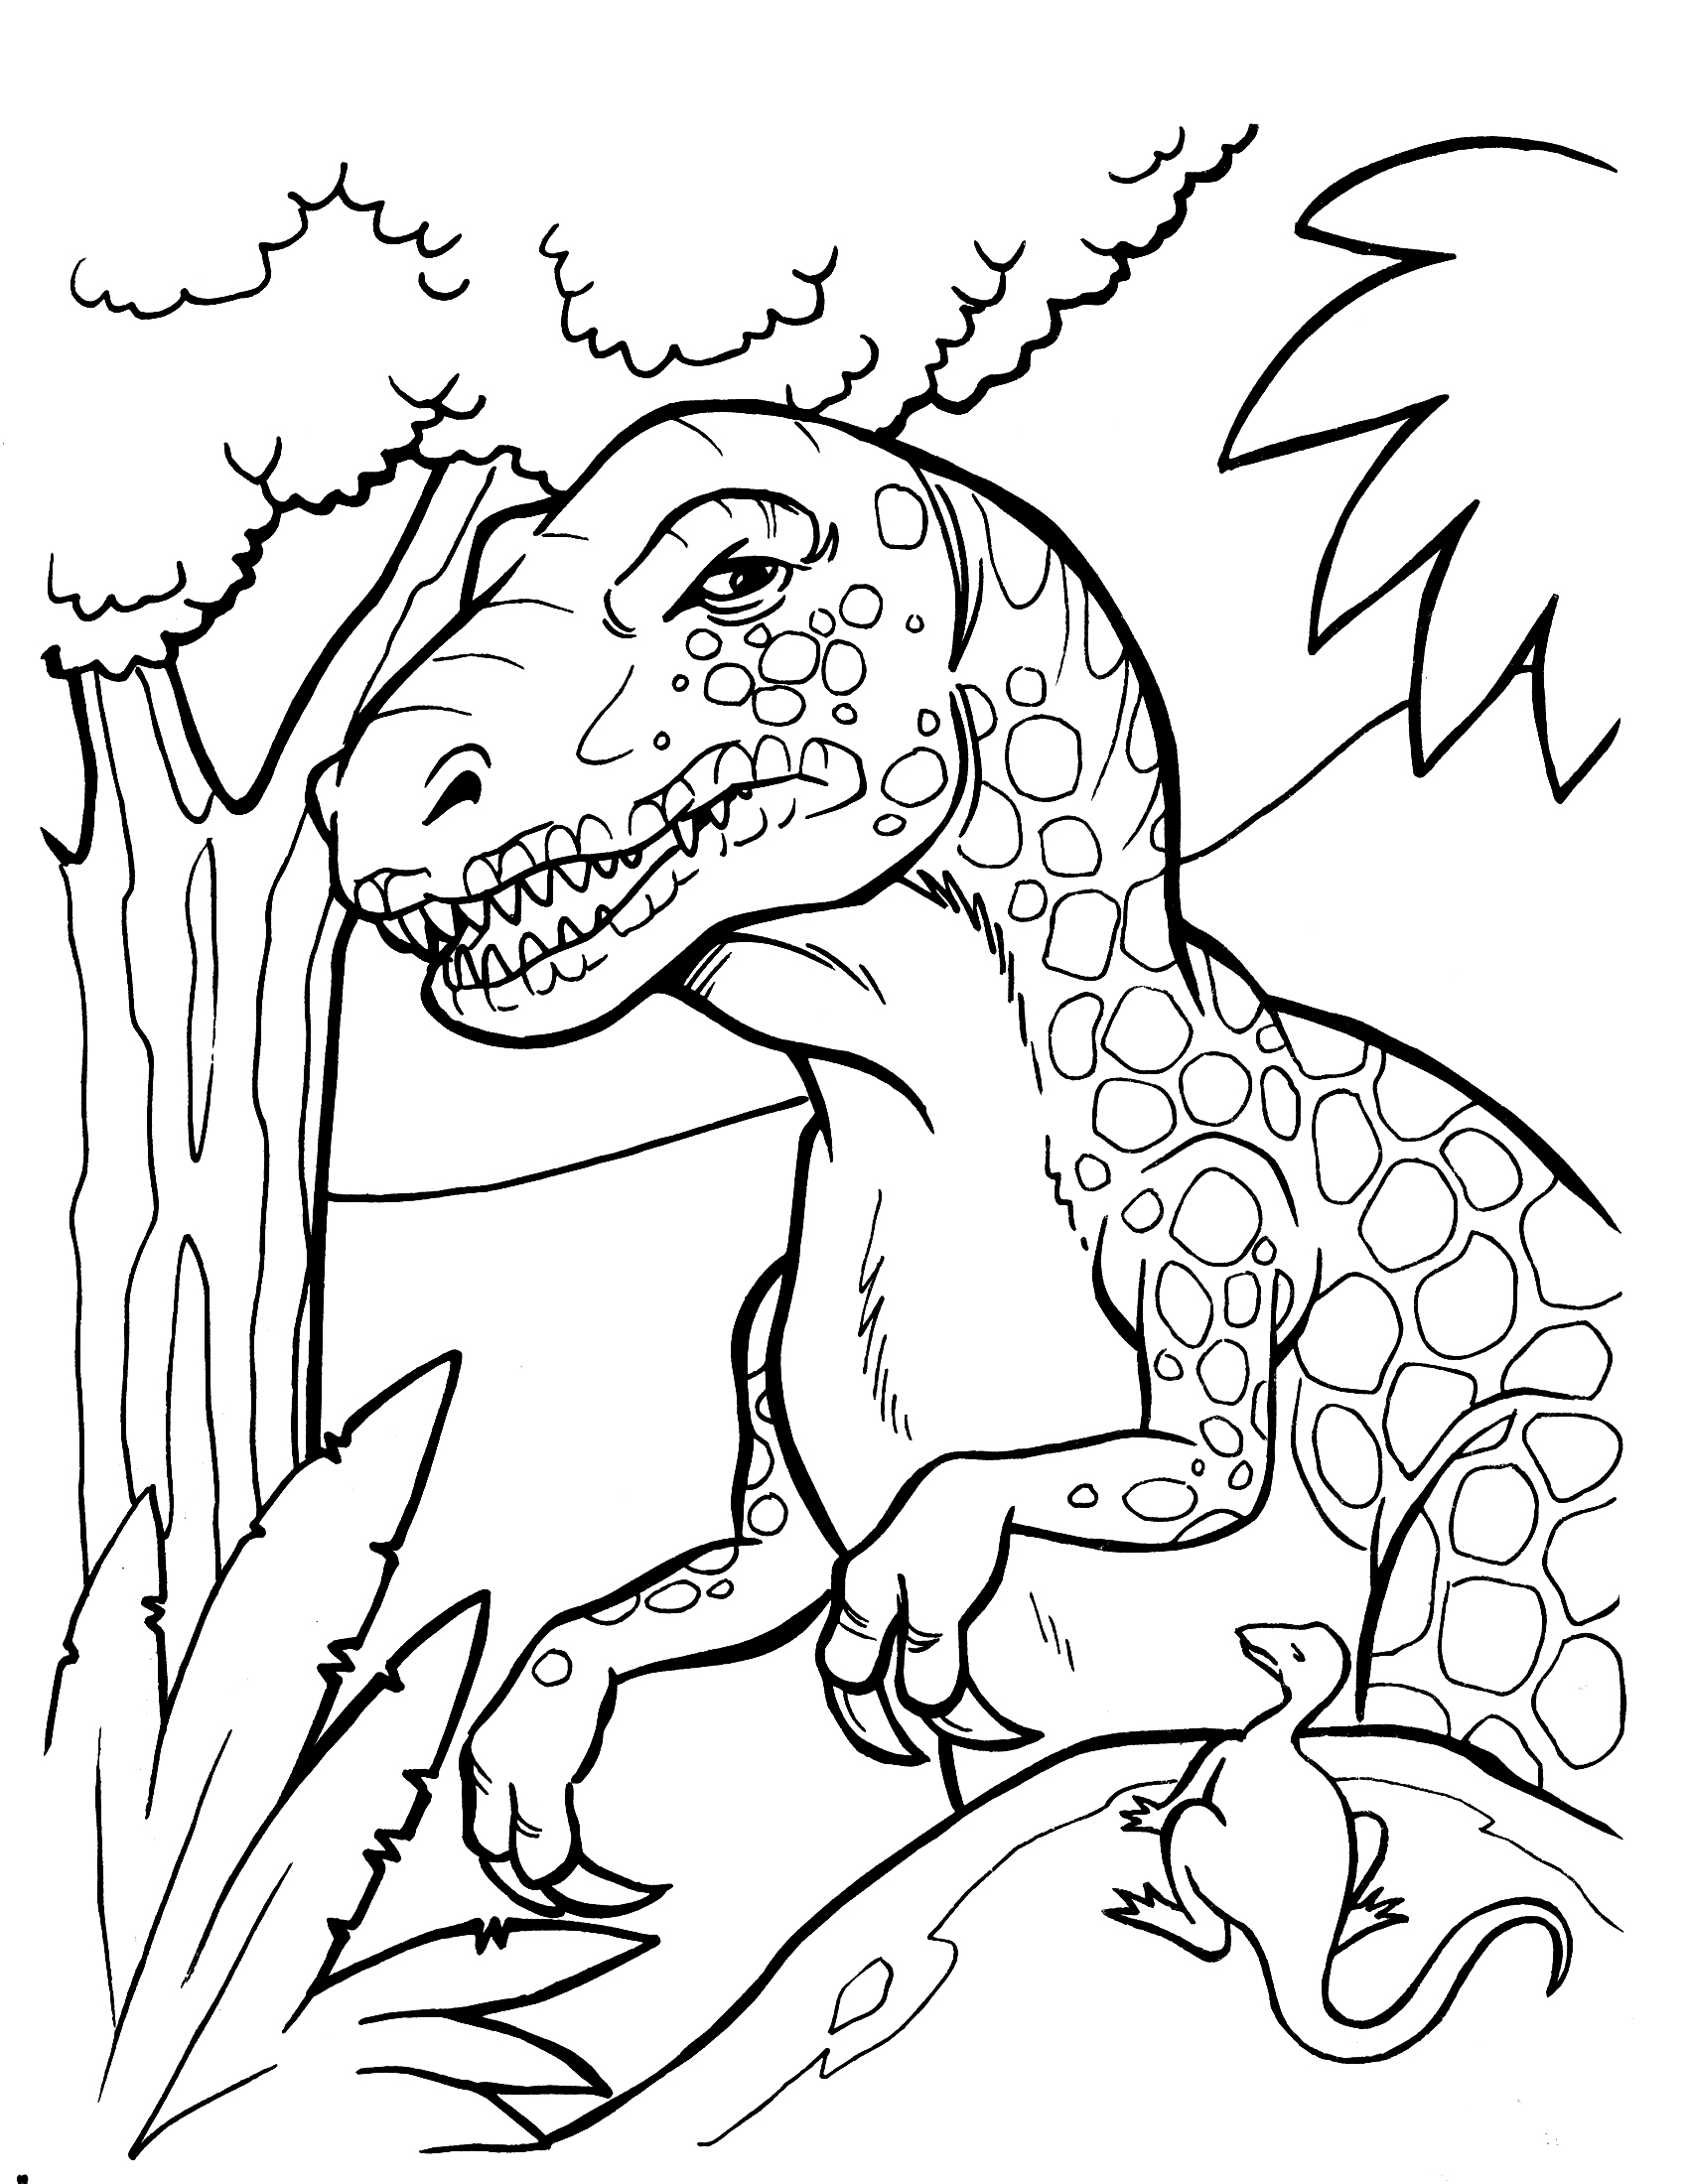 dinosaurs-coloring-pages-t-rex-at-getcolorings-free-printable-colorings-pages-to-print-and